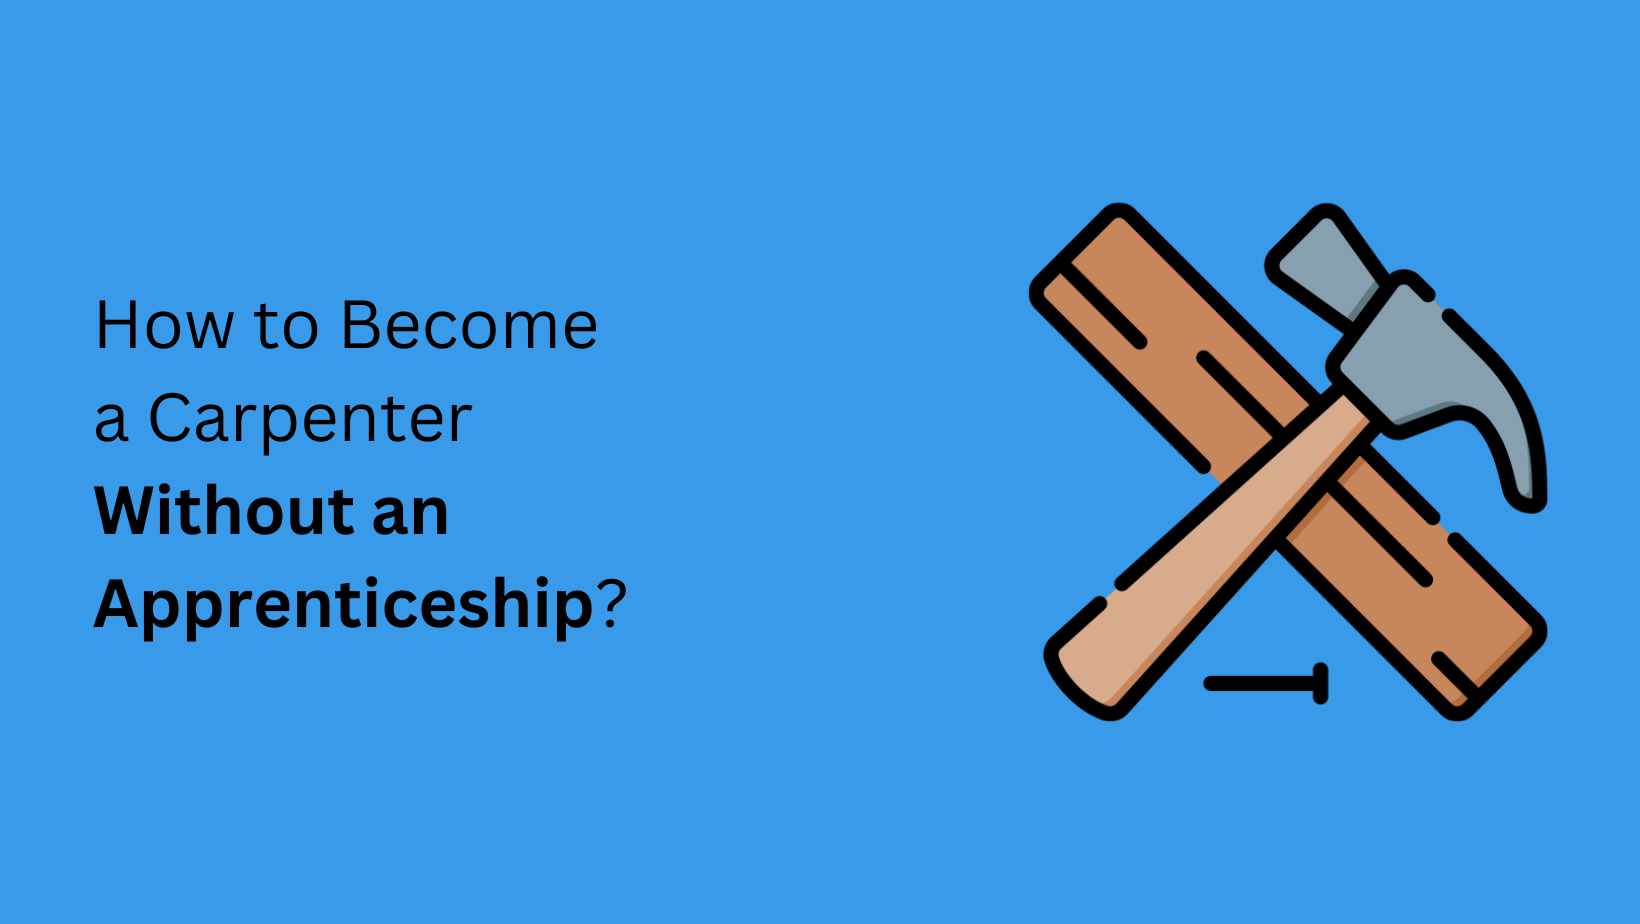 How to Become a Carpenter Without an Apprenticeship